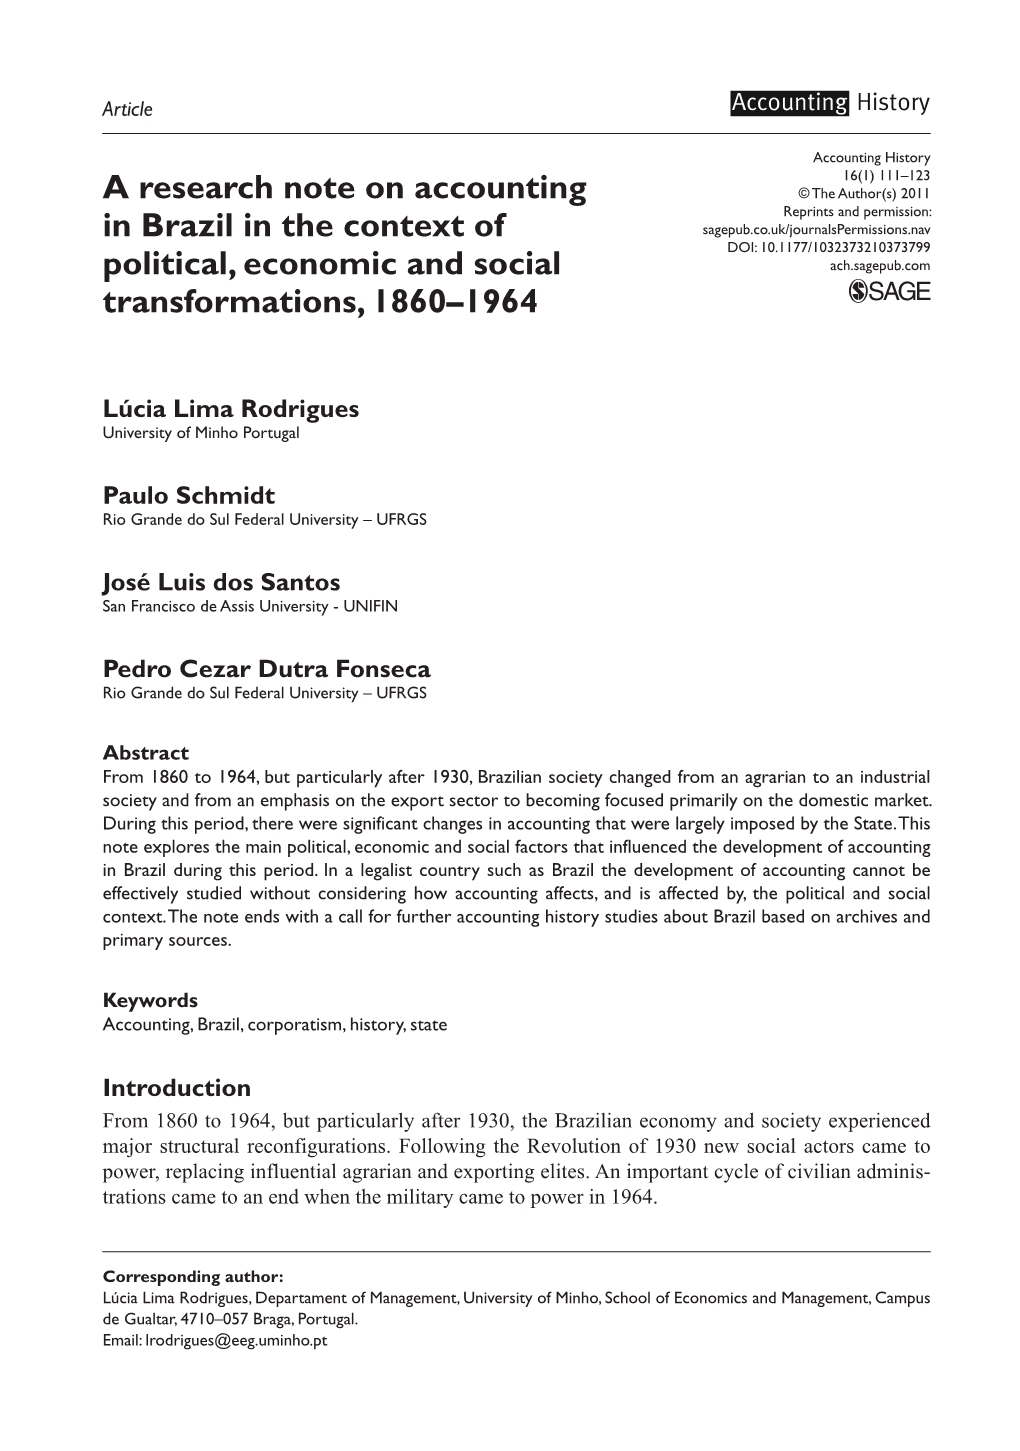 A Research Note on Accounting in Brazil in the Context of Political